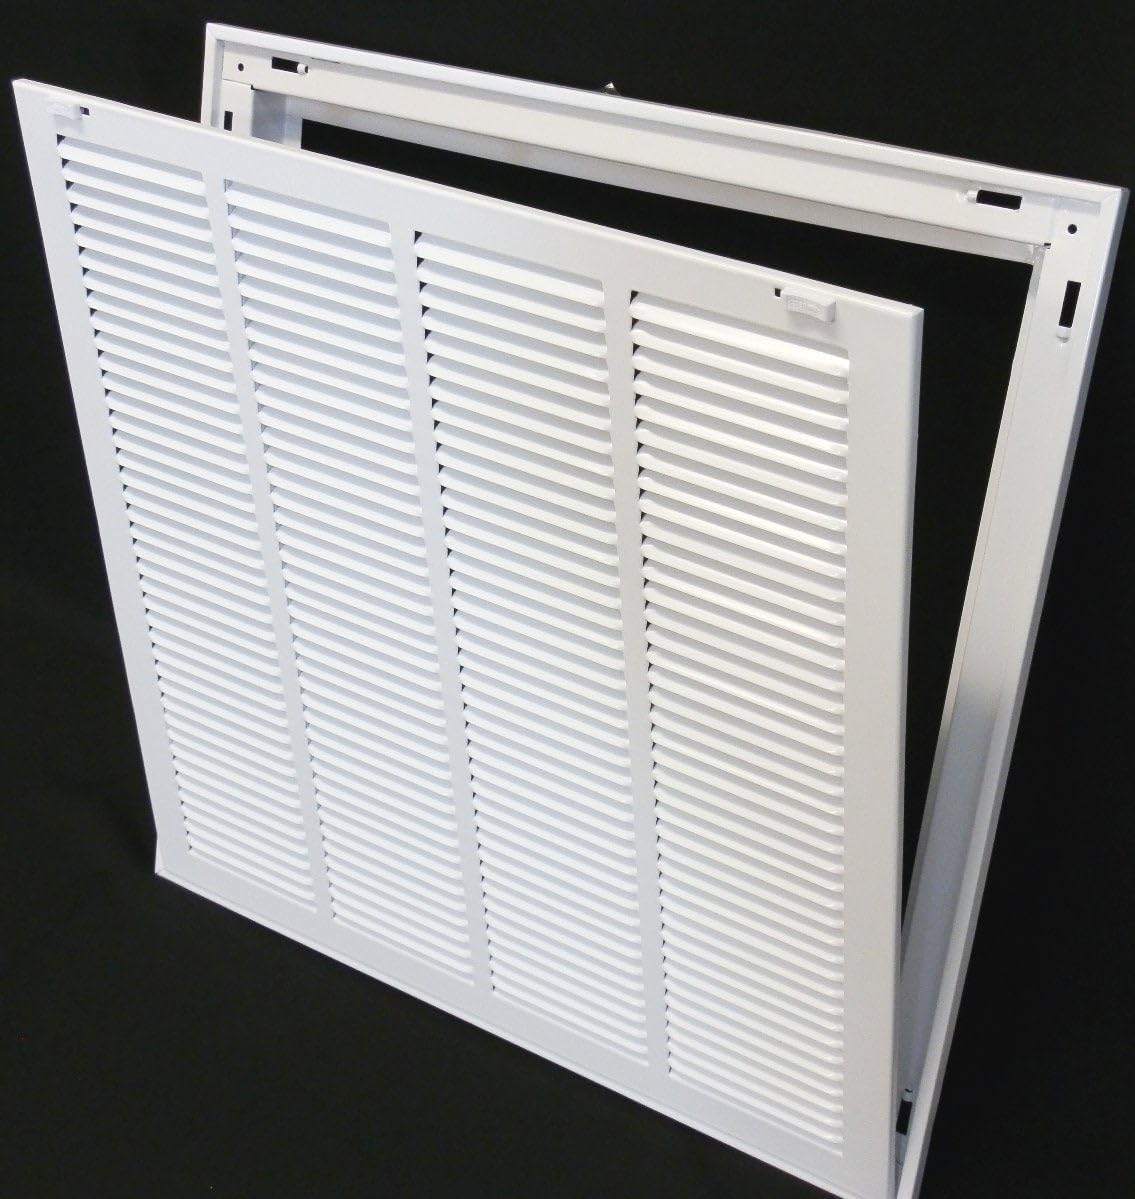 24&quot; X 18&quot; Steel Return Air Filter Grille for 1&quot; Filter - Removable Frame - * Filter Included * [Outer Dimensions: 26 5/8&quot; X 20 5/8&quot;]